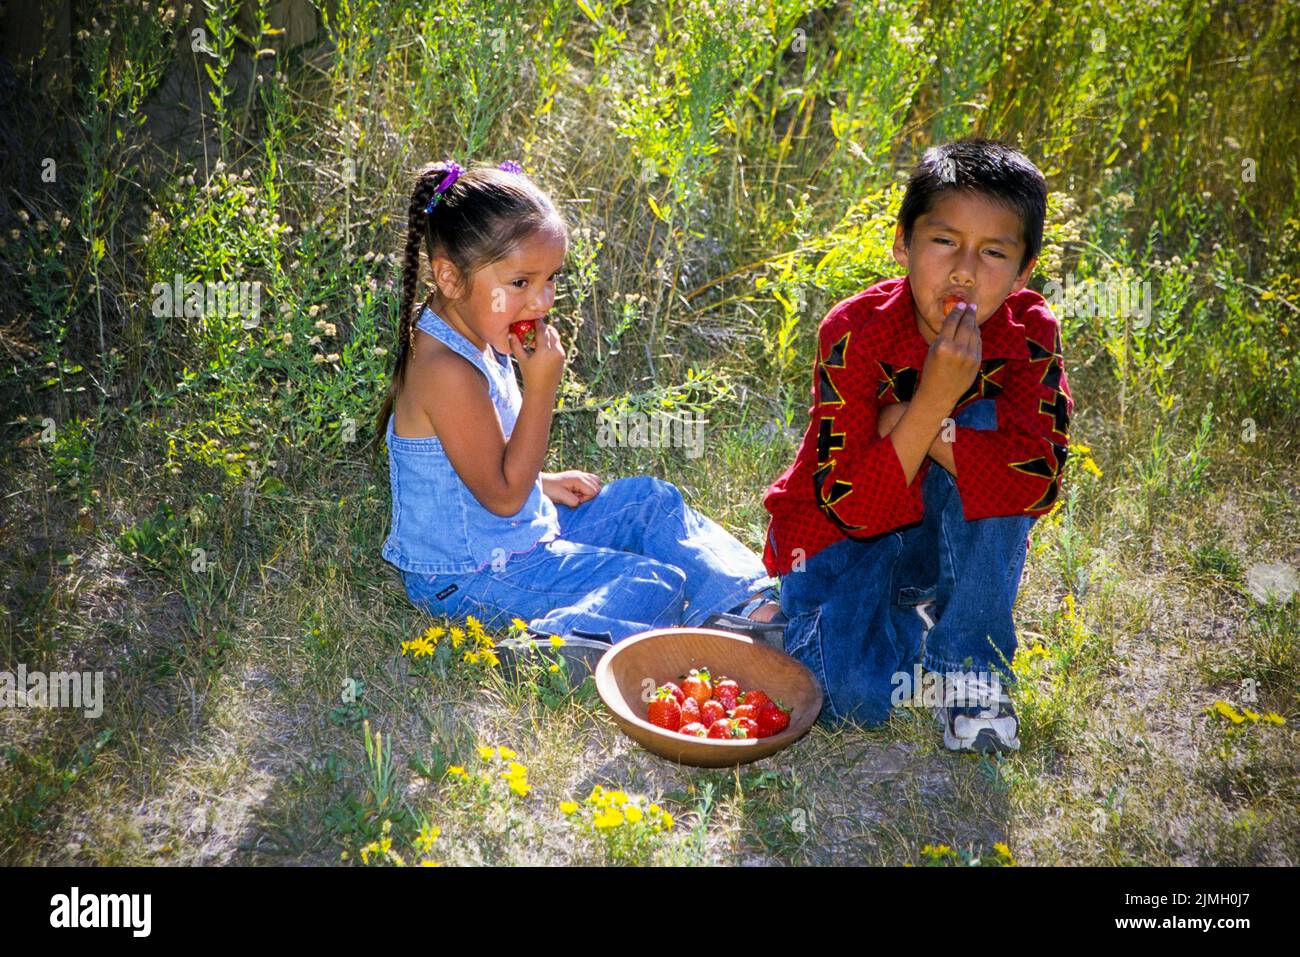 Native American sister and brother eat a bowl of strawberries. Fort Hall Idaho Stock Photo